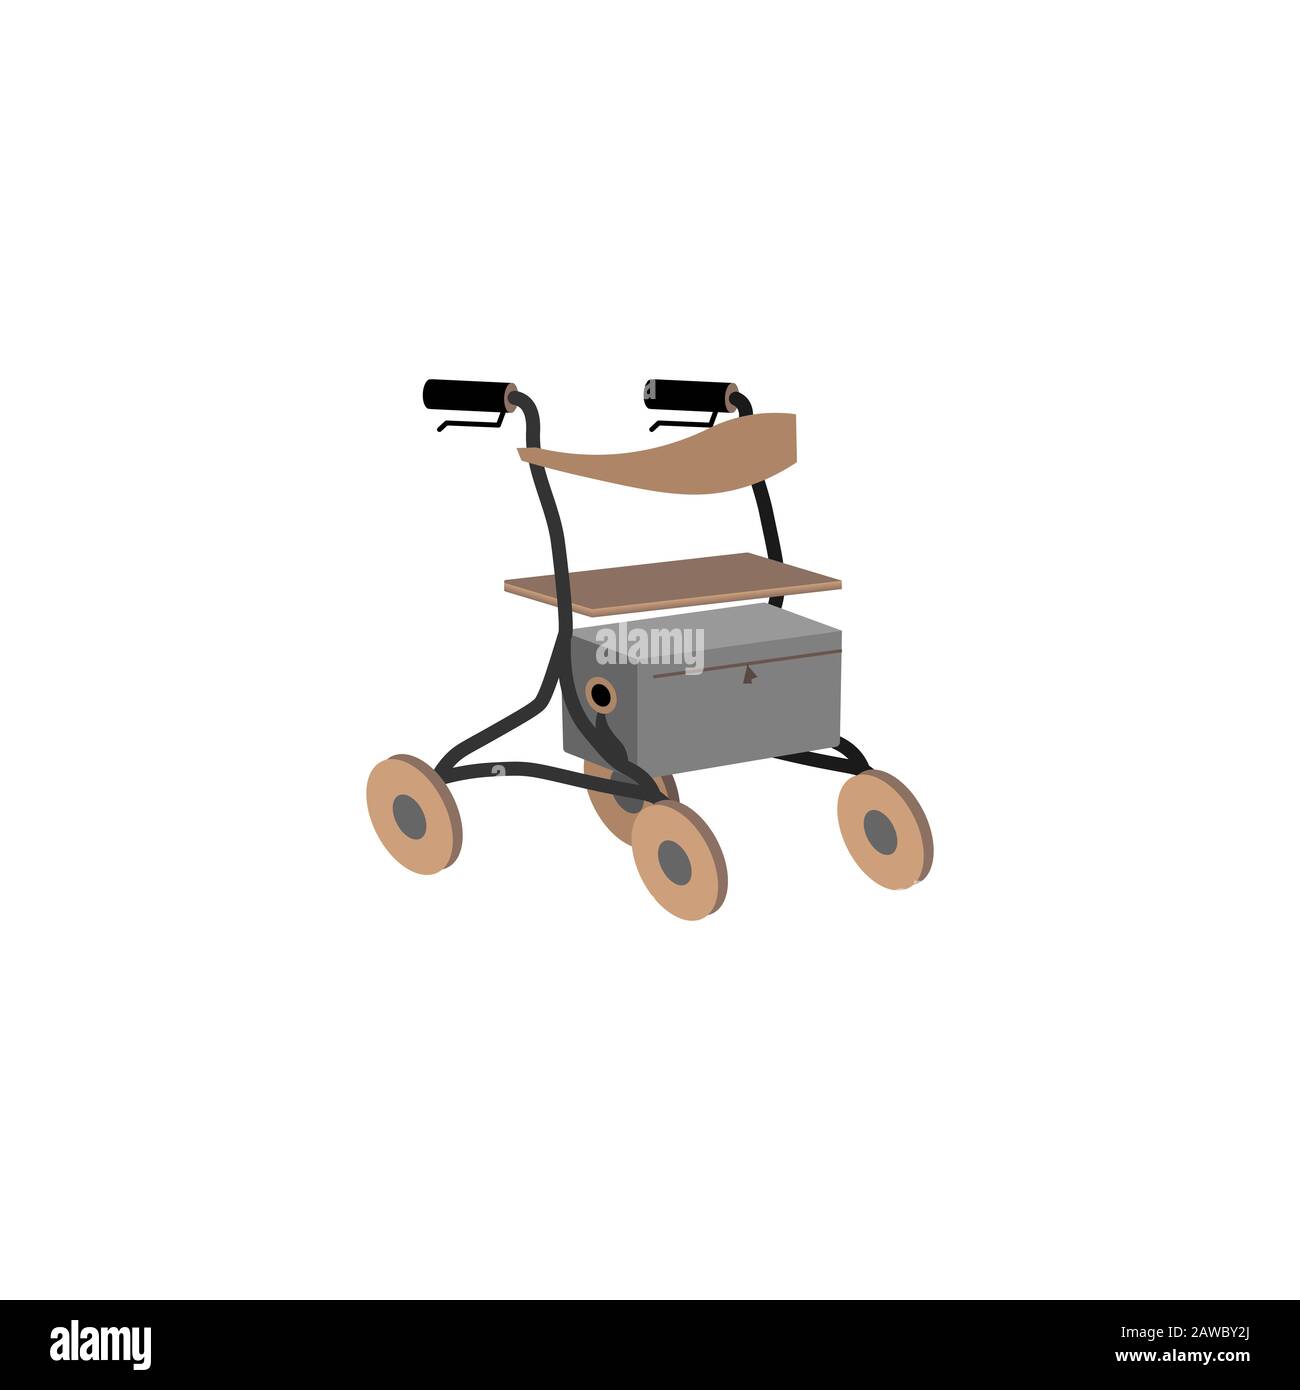 Rollator for older people and rehabilitation. Colorful flat style vector illustration can be used in greeting cards, posters, flyers, banners, promotions, invitations, hospital promotions etc. EPS10 Stock Vector